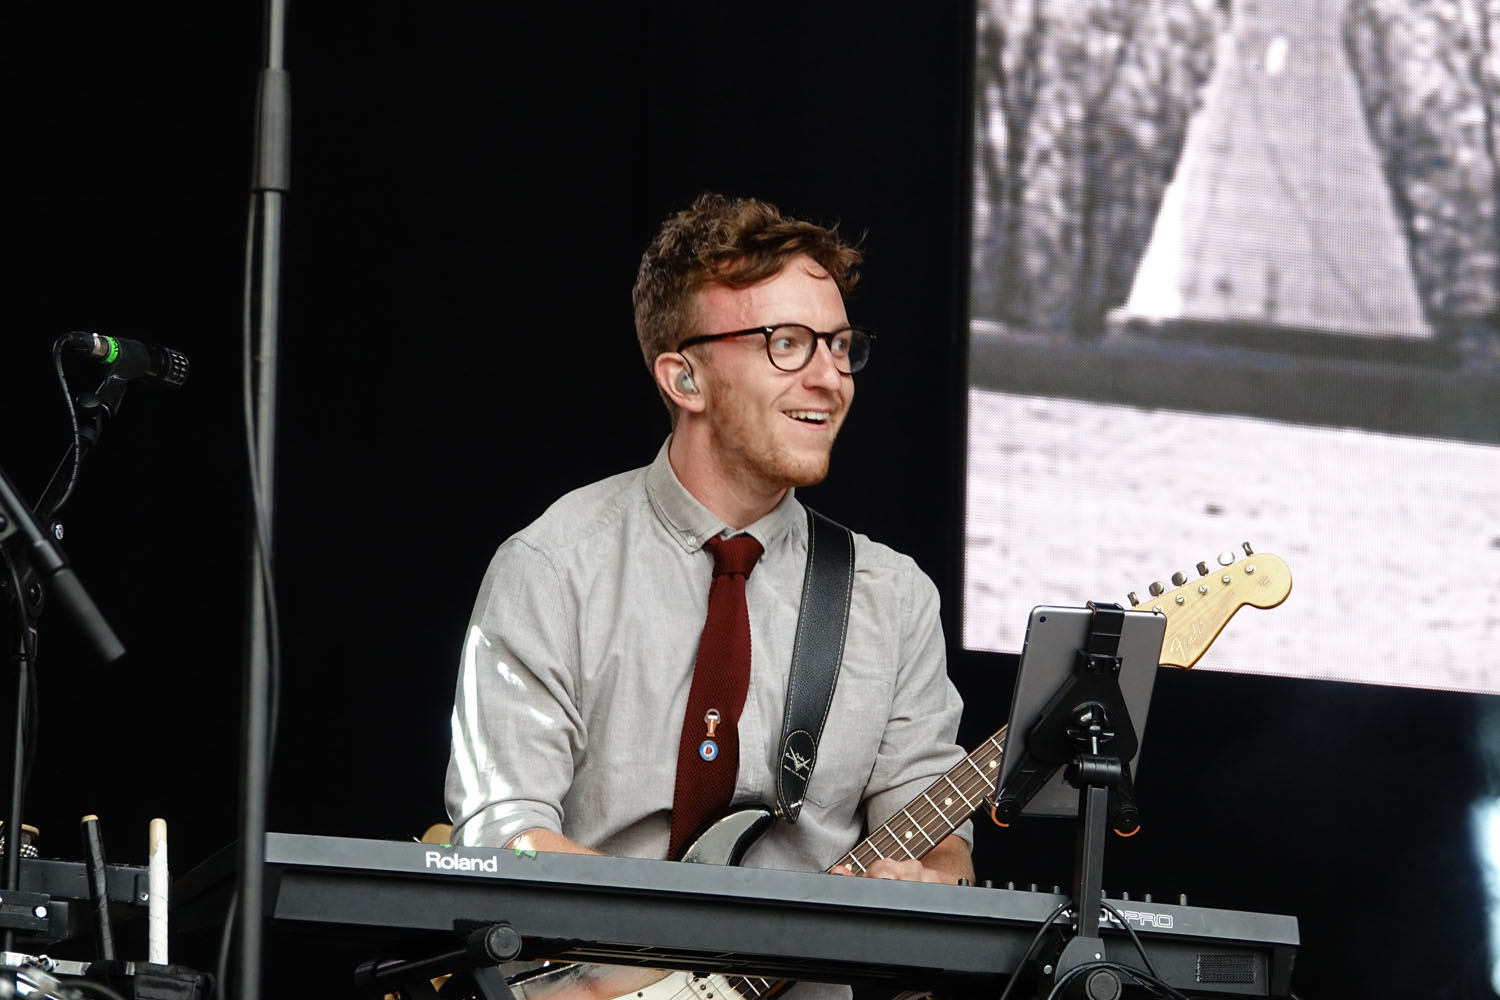 Public Service Broadcasting on the main stage at Deer Shed 2018